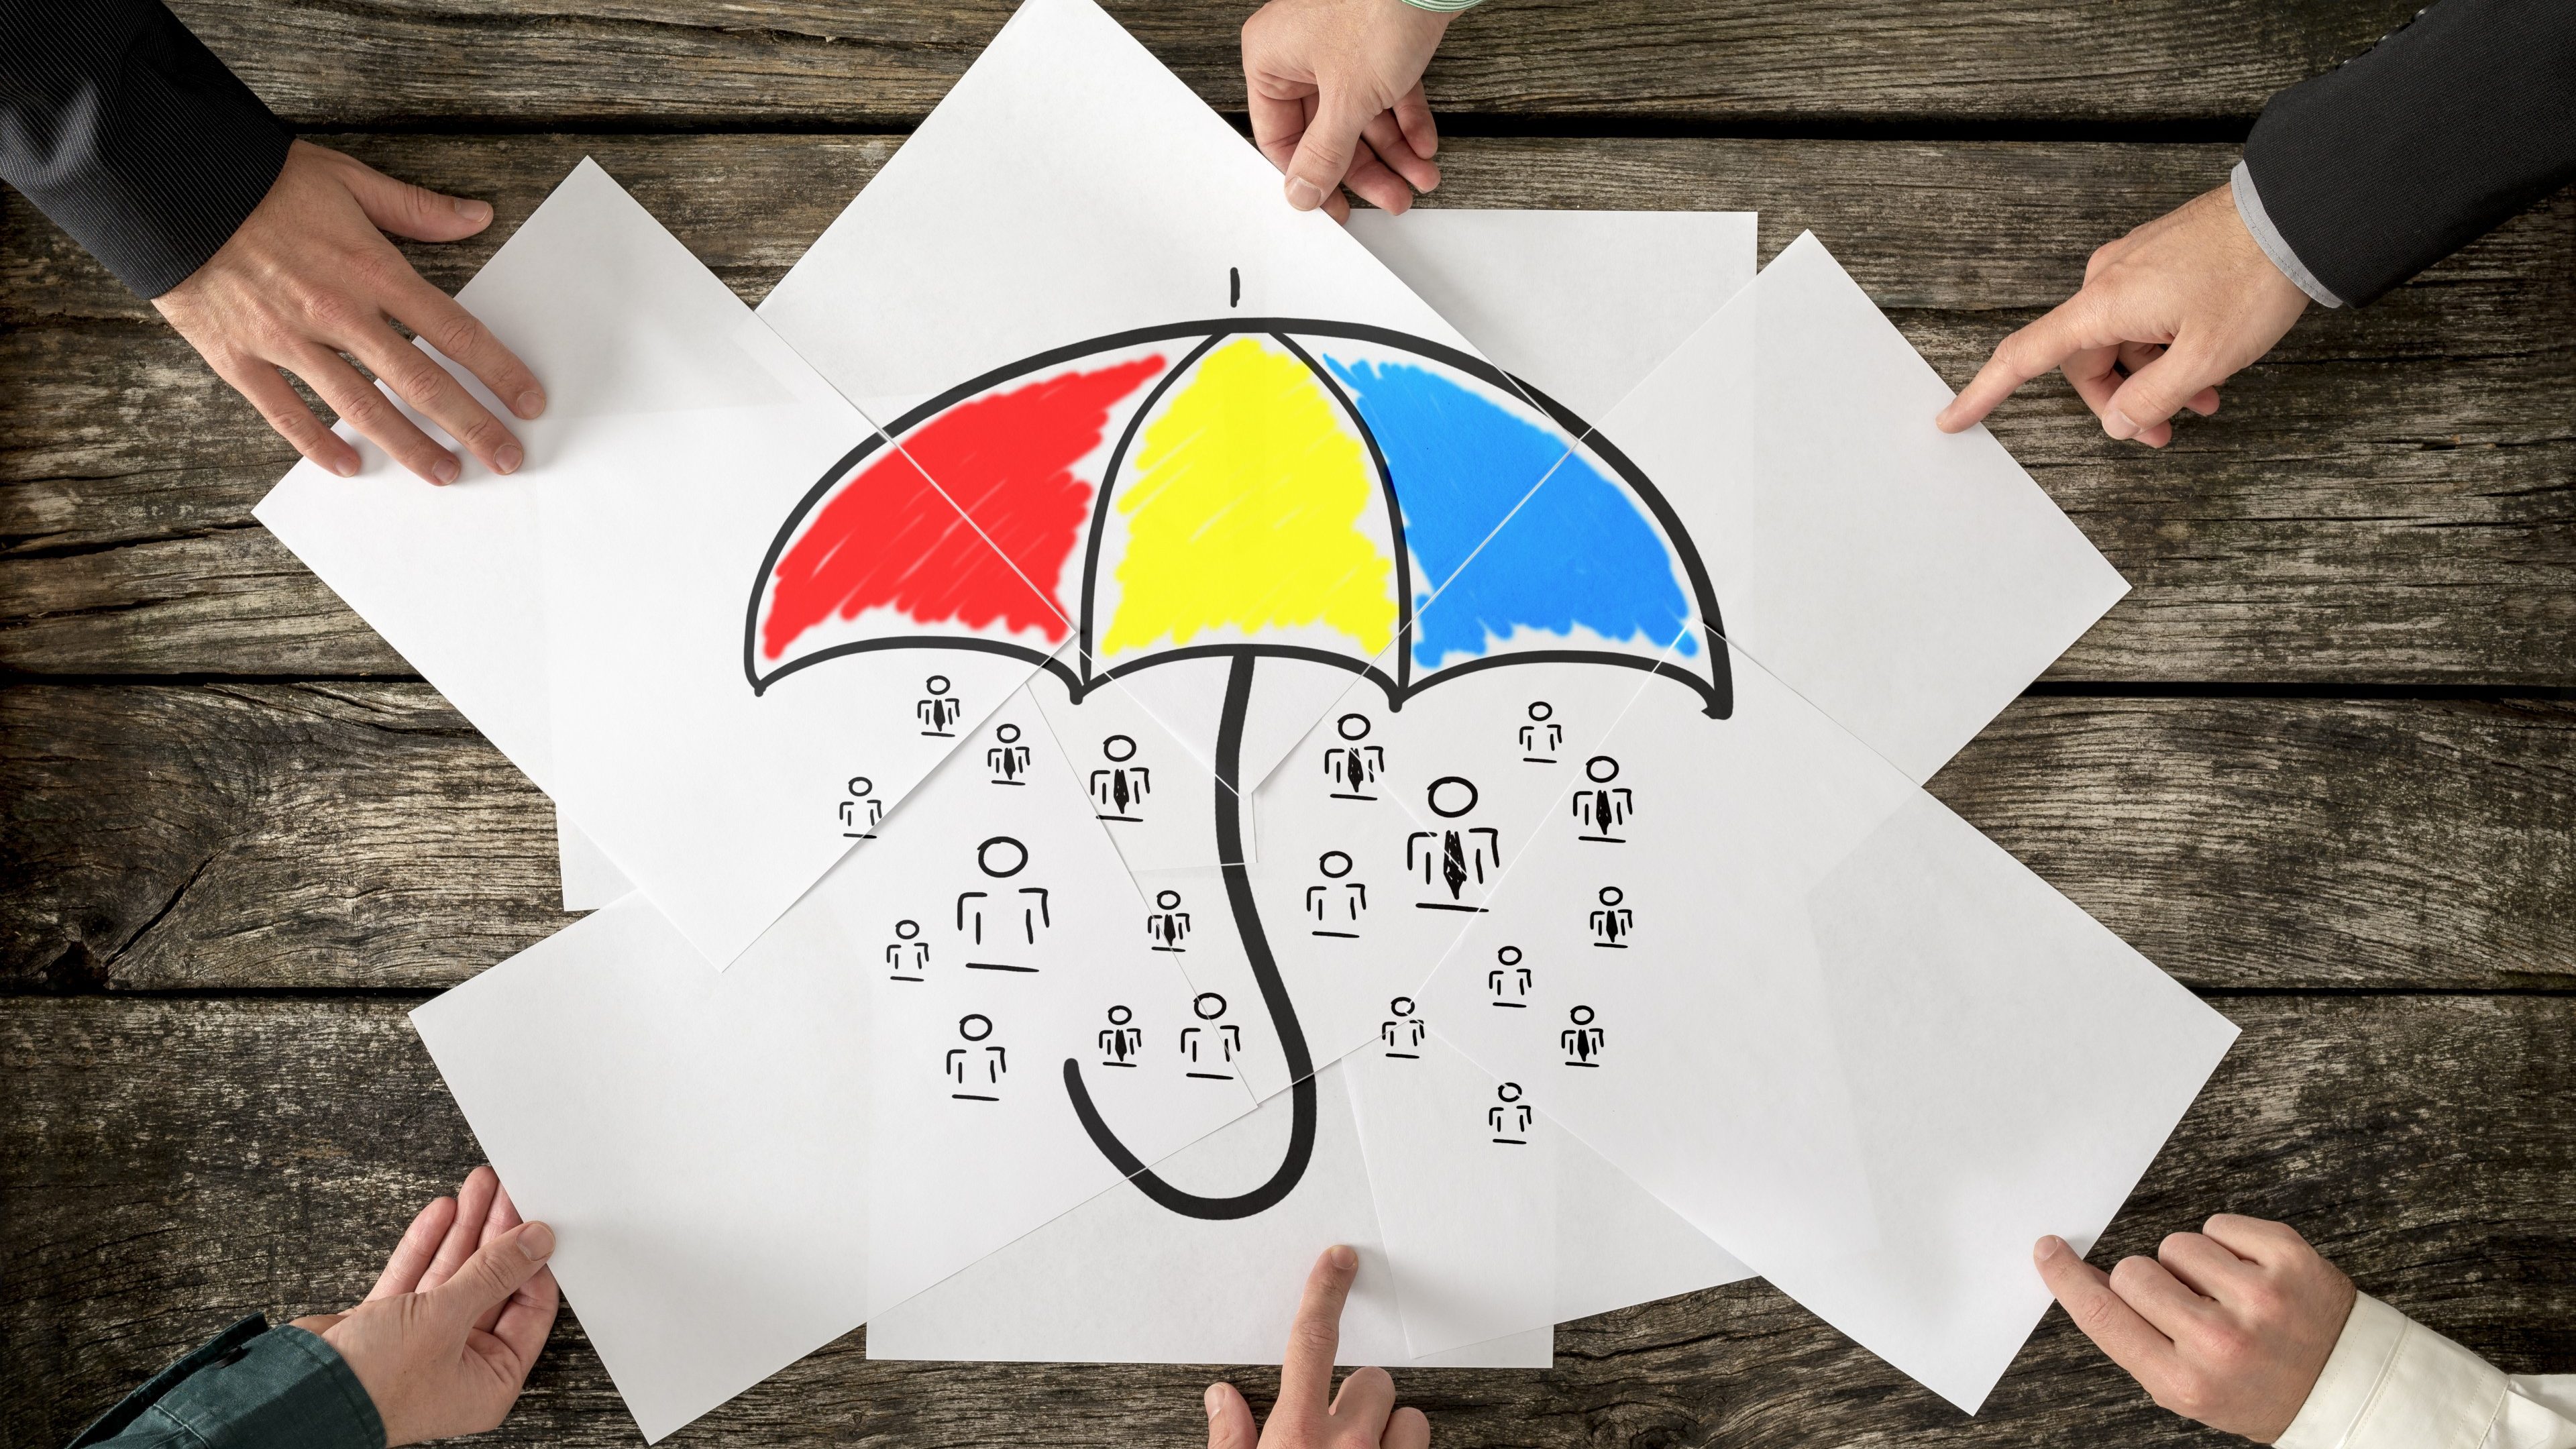 Safety and life insurance concept - six hands assembling a colourful umbrella sheltering many people icons drawn on white papers.